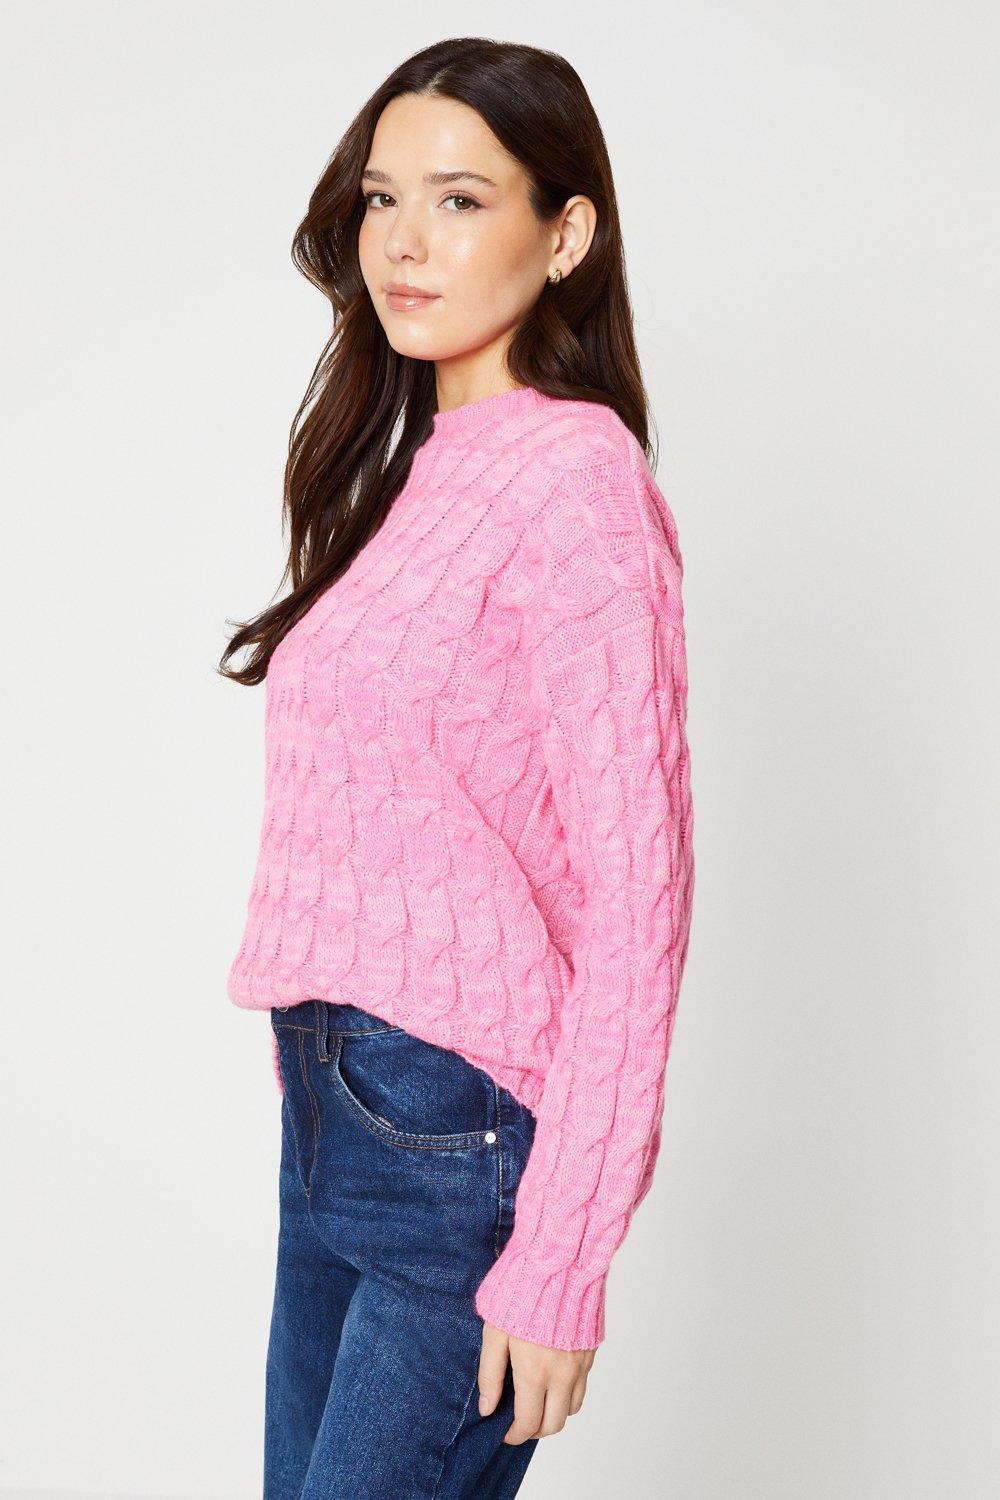 Women's Long Sleeve Cable Knit Jumper - pink - S